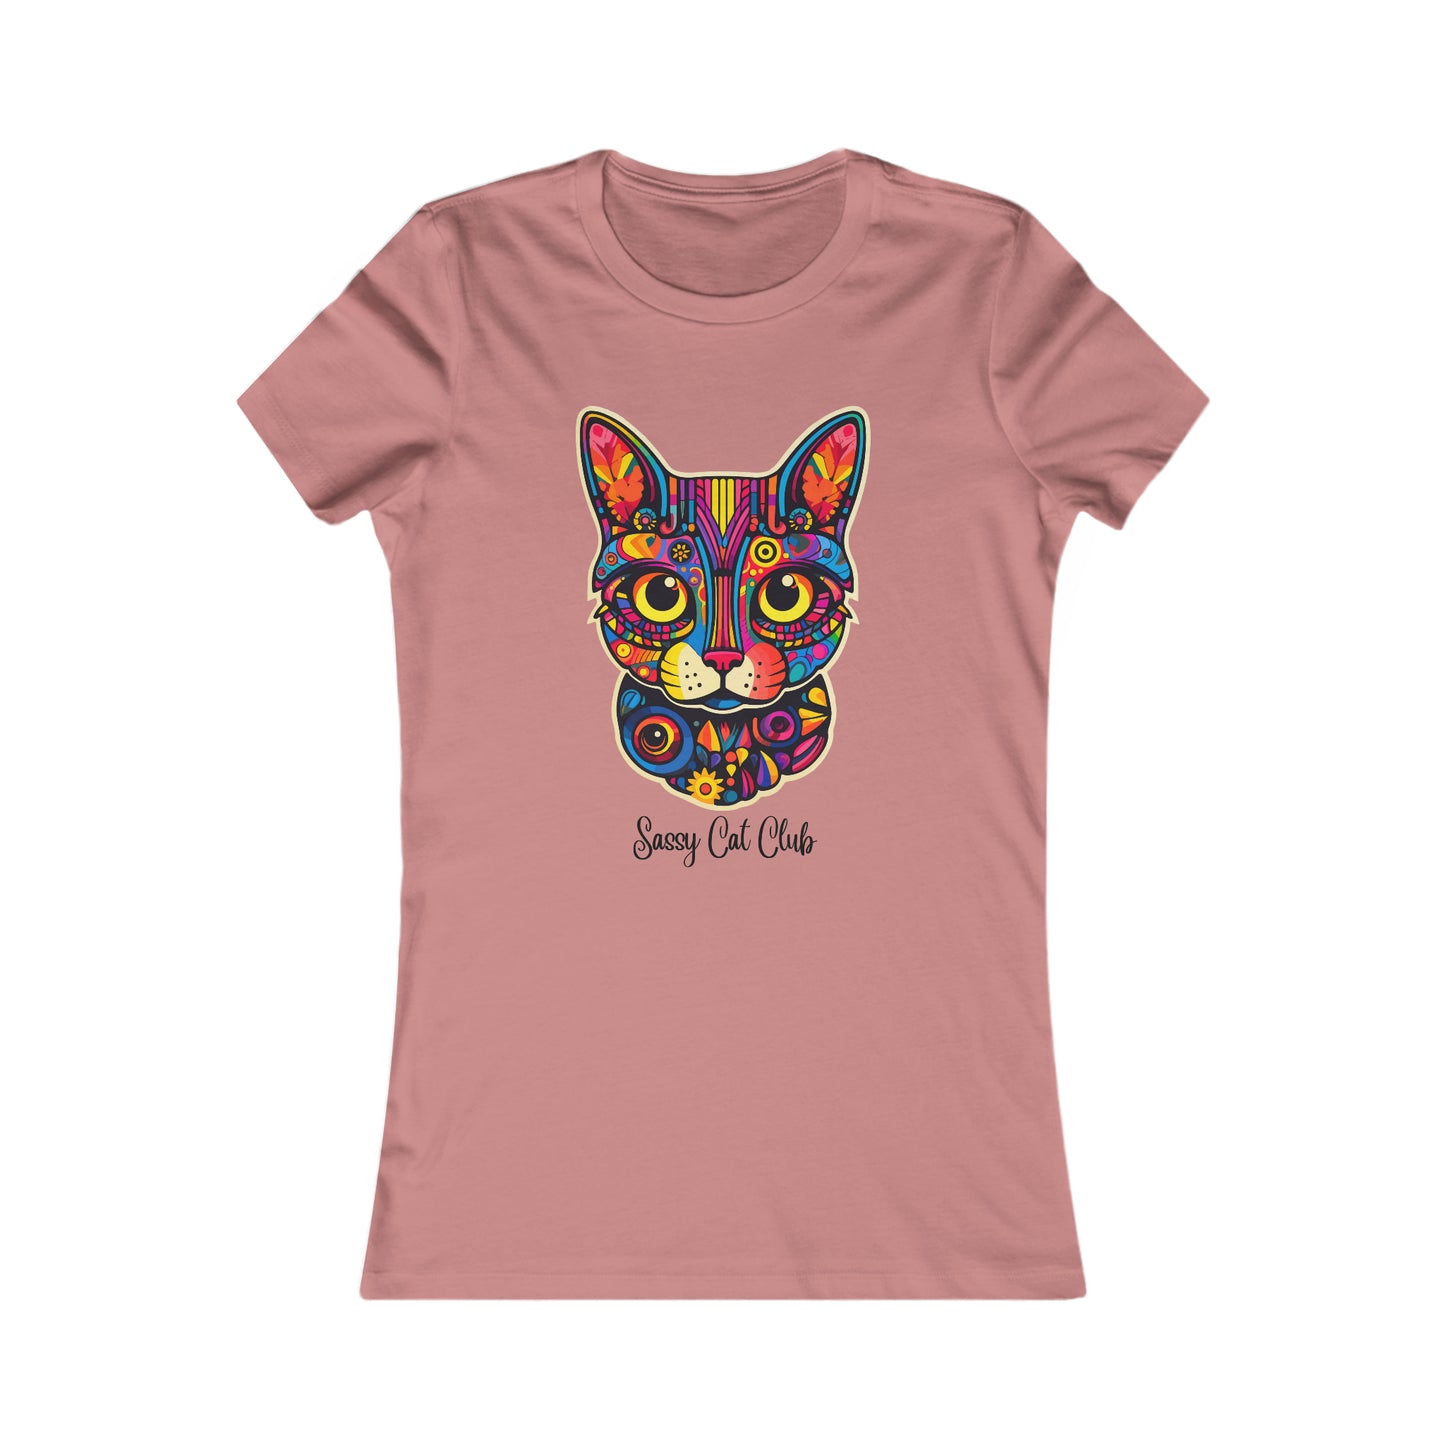 Calling all cat lovers, this “Sassy Cat Club” on this Women's Favorite Tee was designed for you in several colors for you to choose from. Slim fit so please check the size table.